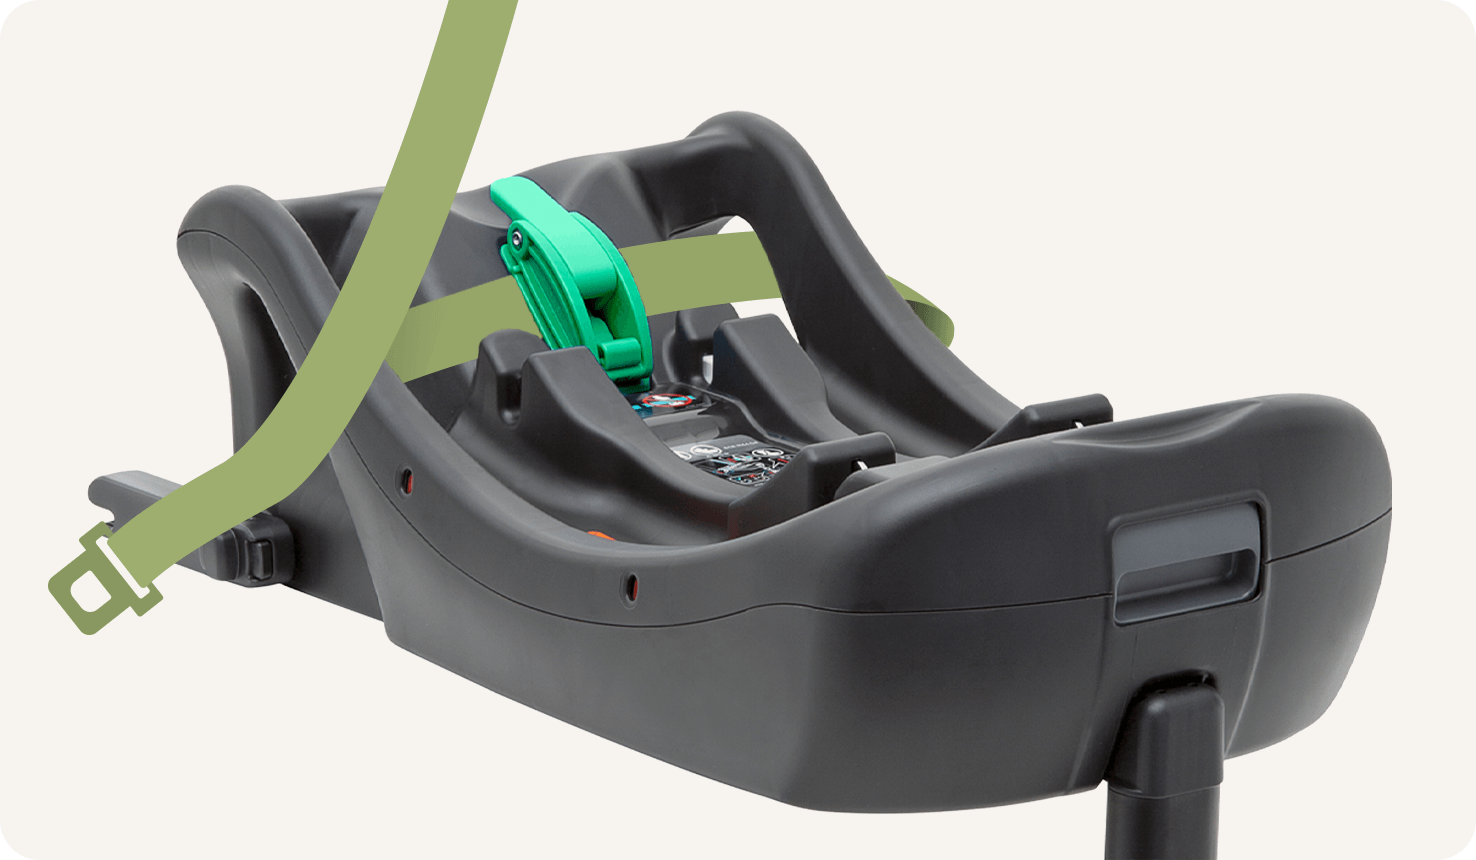  Left angle view of the Joie i-Base 2 car seat base with an illustrated seatbelt demonstrating the installation path. 